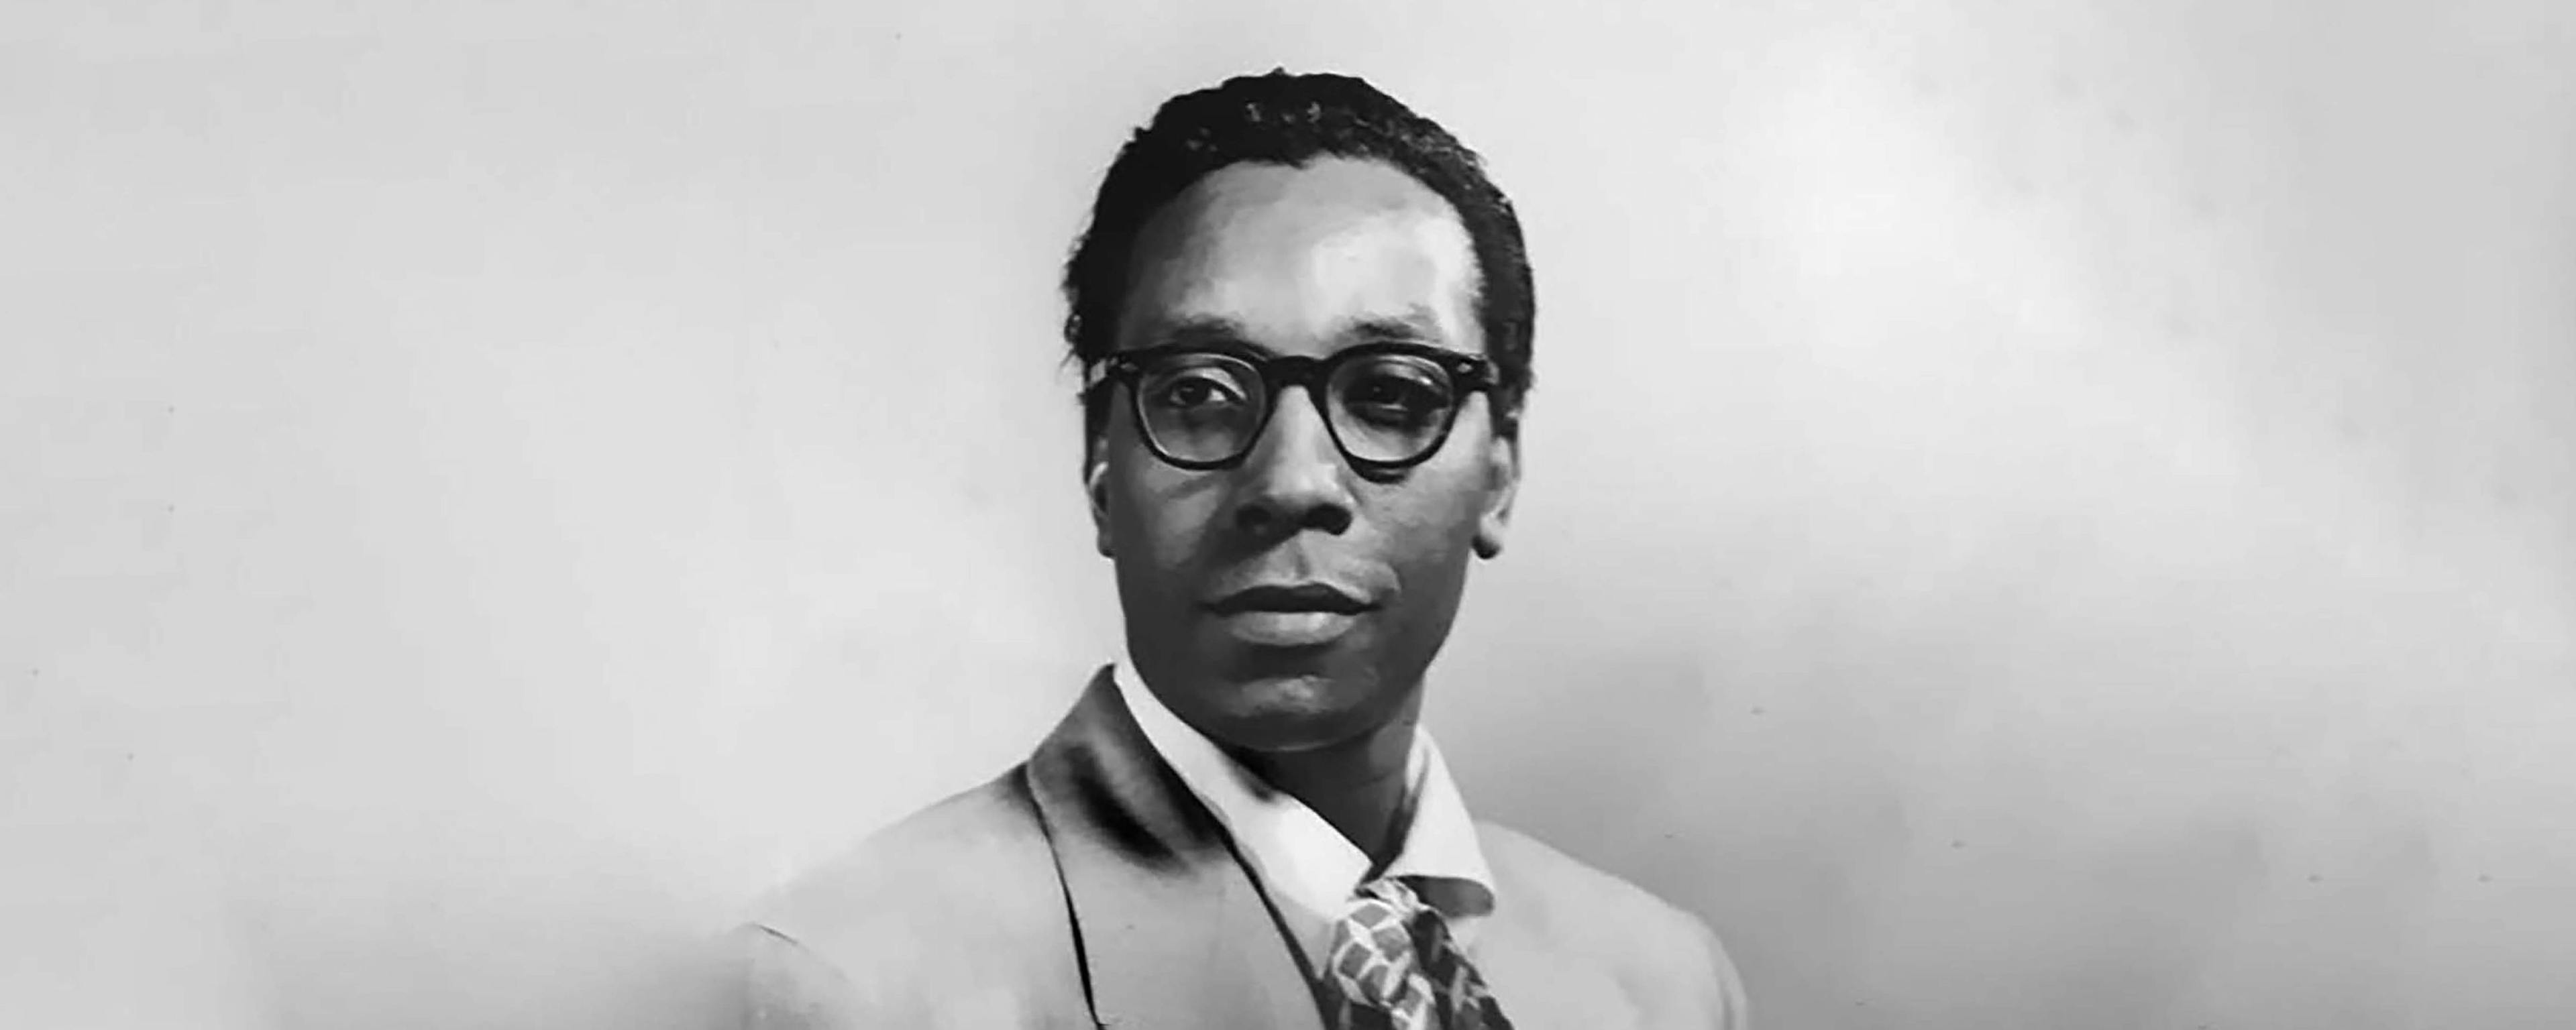 A black and white photo portrait of a man with glasses smiling